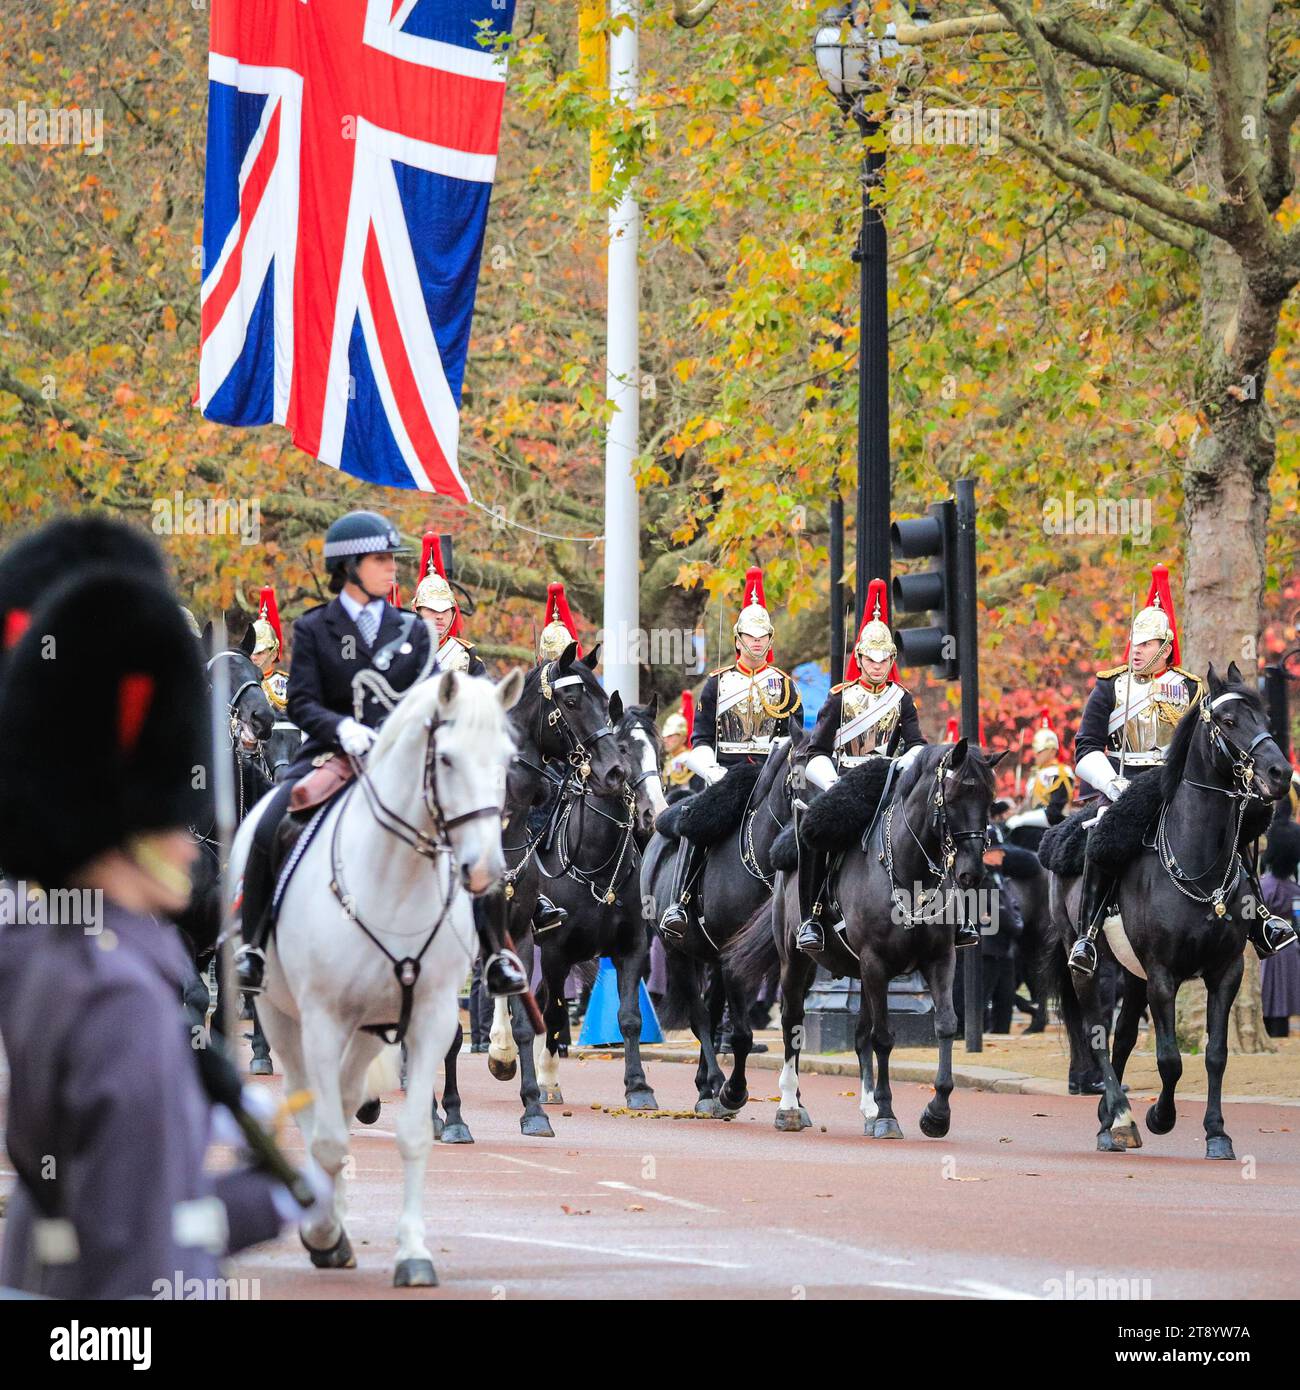 London, UK. 21st Nov, 2023. Mounted soldiers of the Household Cavalry. Troops proceed along the Mall, accompanying the carriages carrying members of the British Royal family and the state visitors from South Korea. The President of the Republic of Korea, His Excellency Yoon Suk Yeol, accompanied by Mrs Kim Keon Hee, pays a State Visit to the UK as the guest of their Majesties the King and Queen. Credit: Imageplotter/Alamy Live News Stock Photo